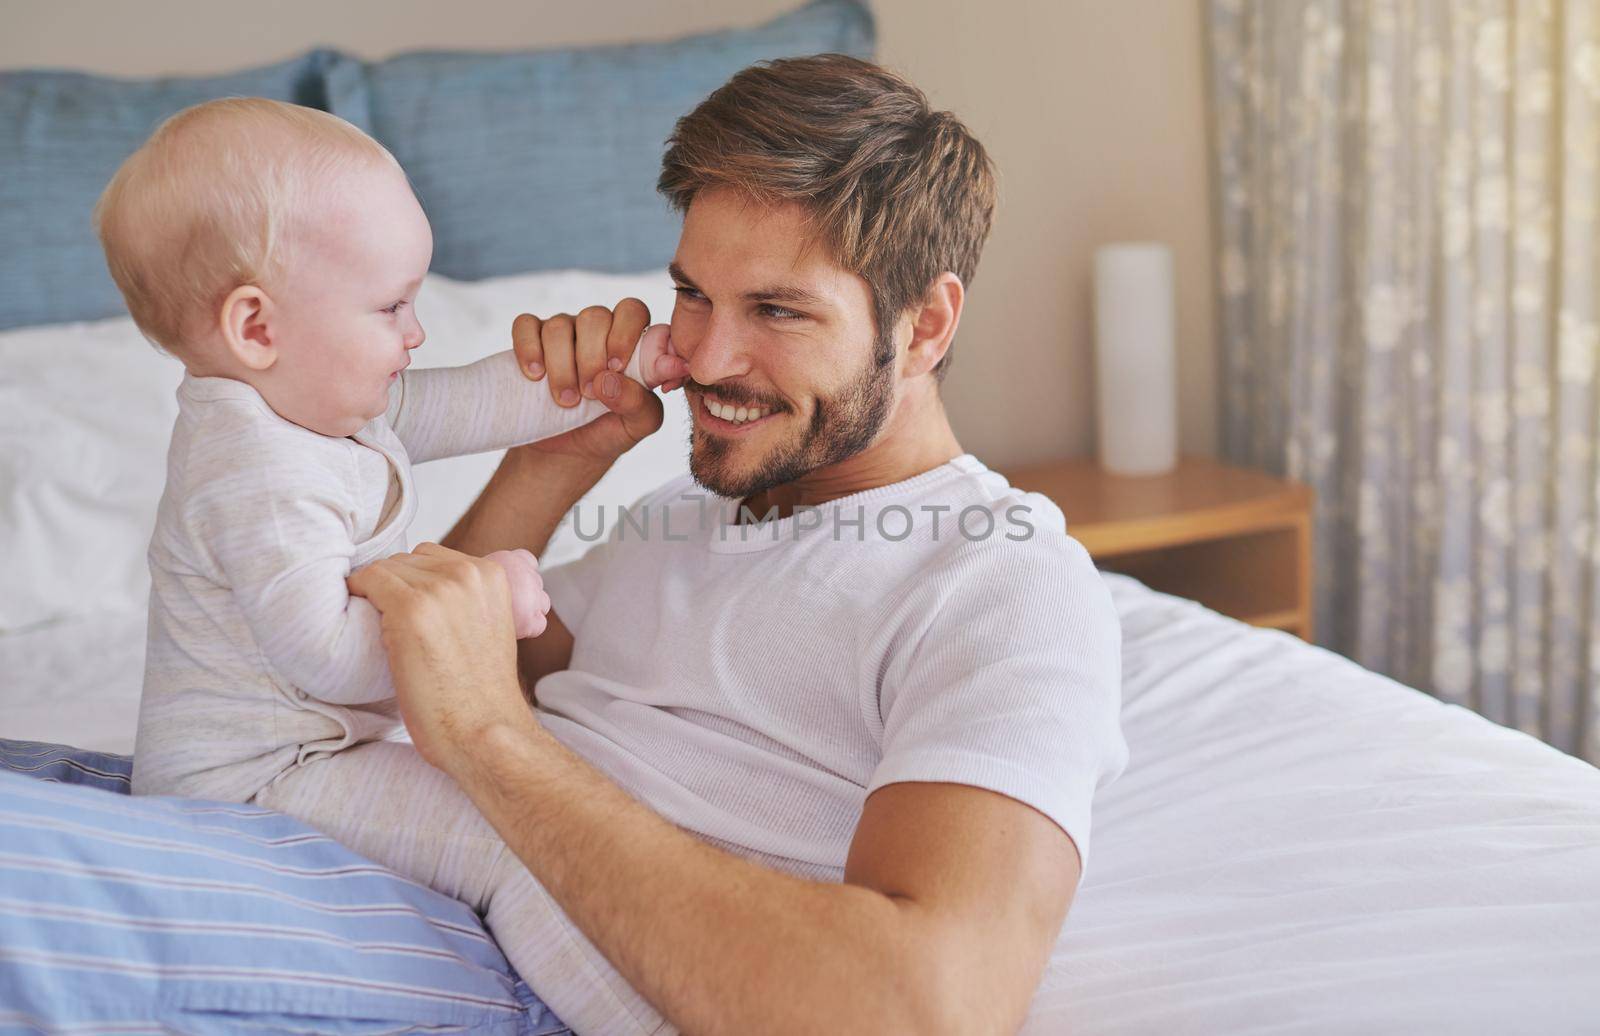 Bonding with his baby girl. a young father and his baby daughter in the bedroom